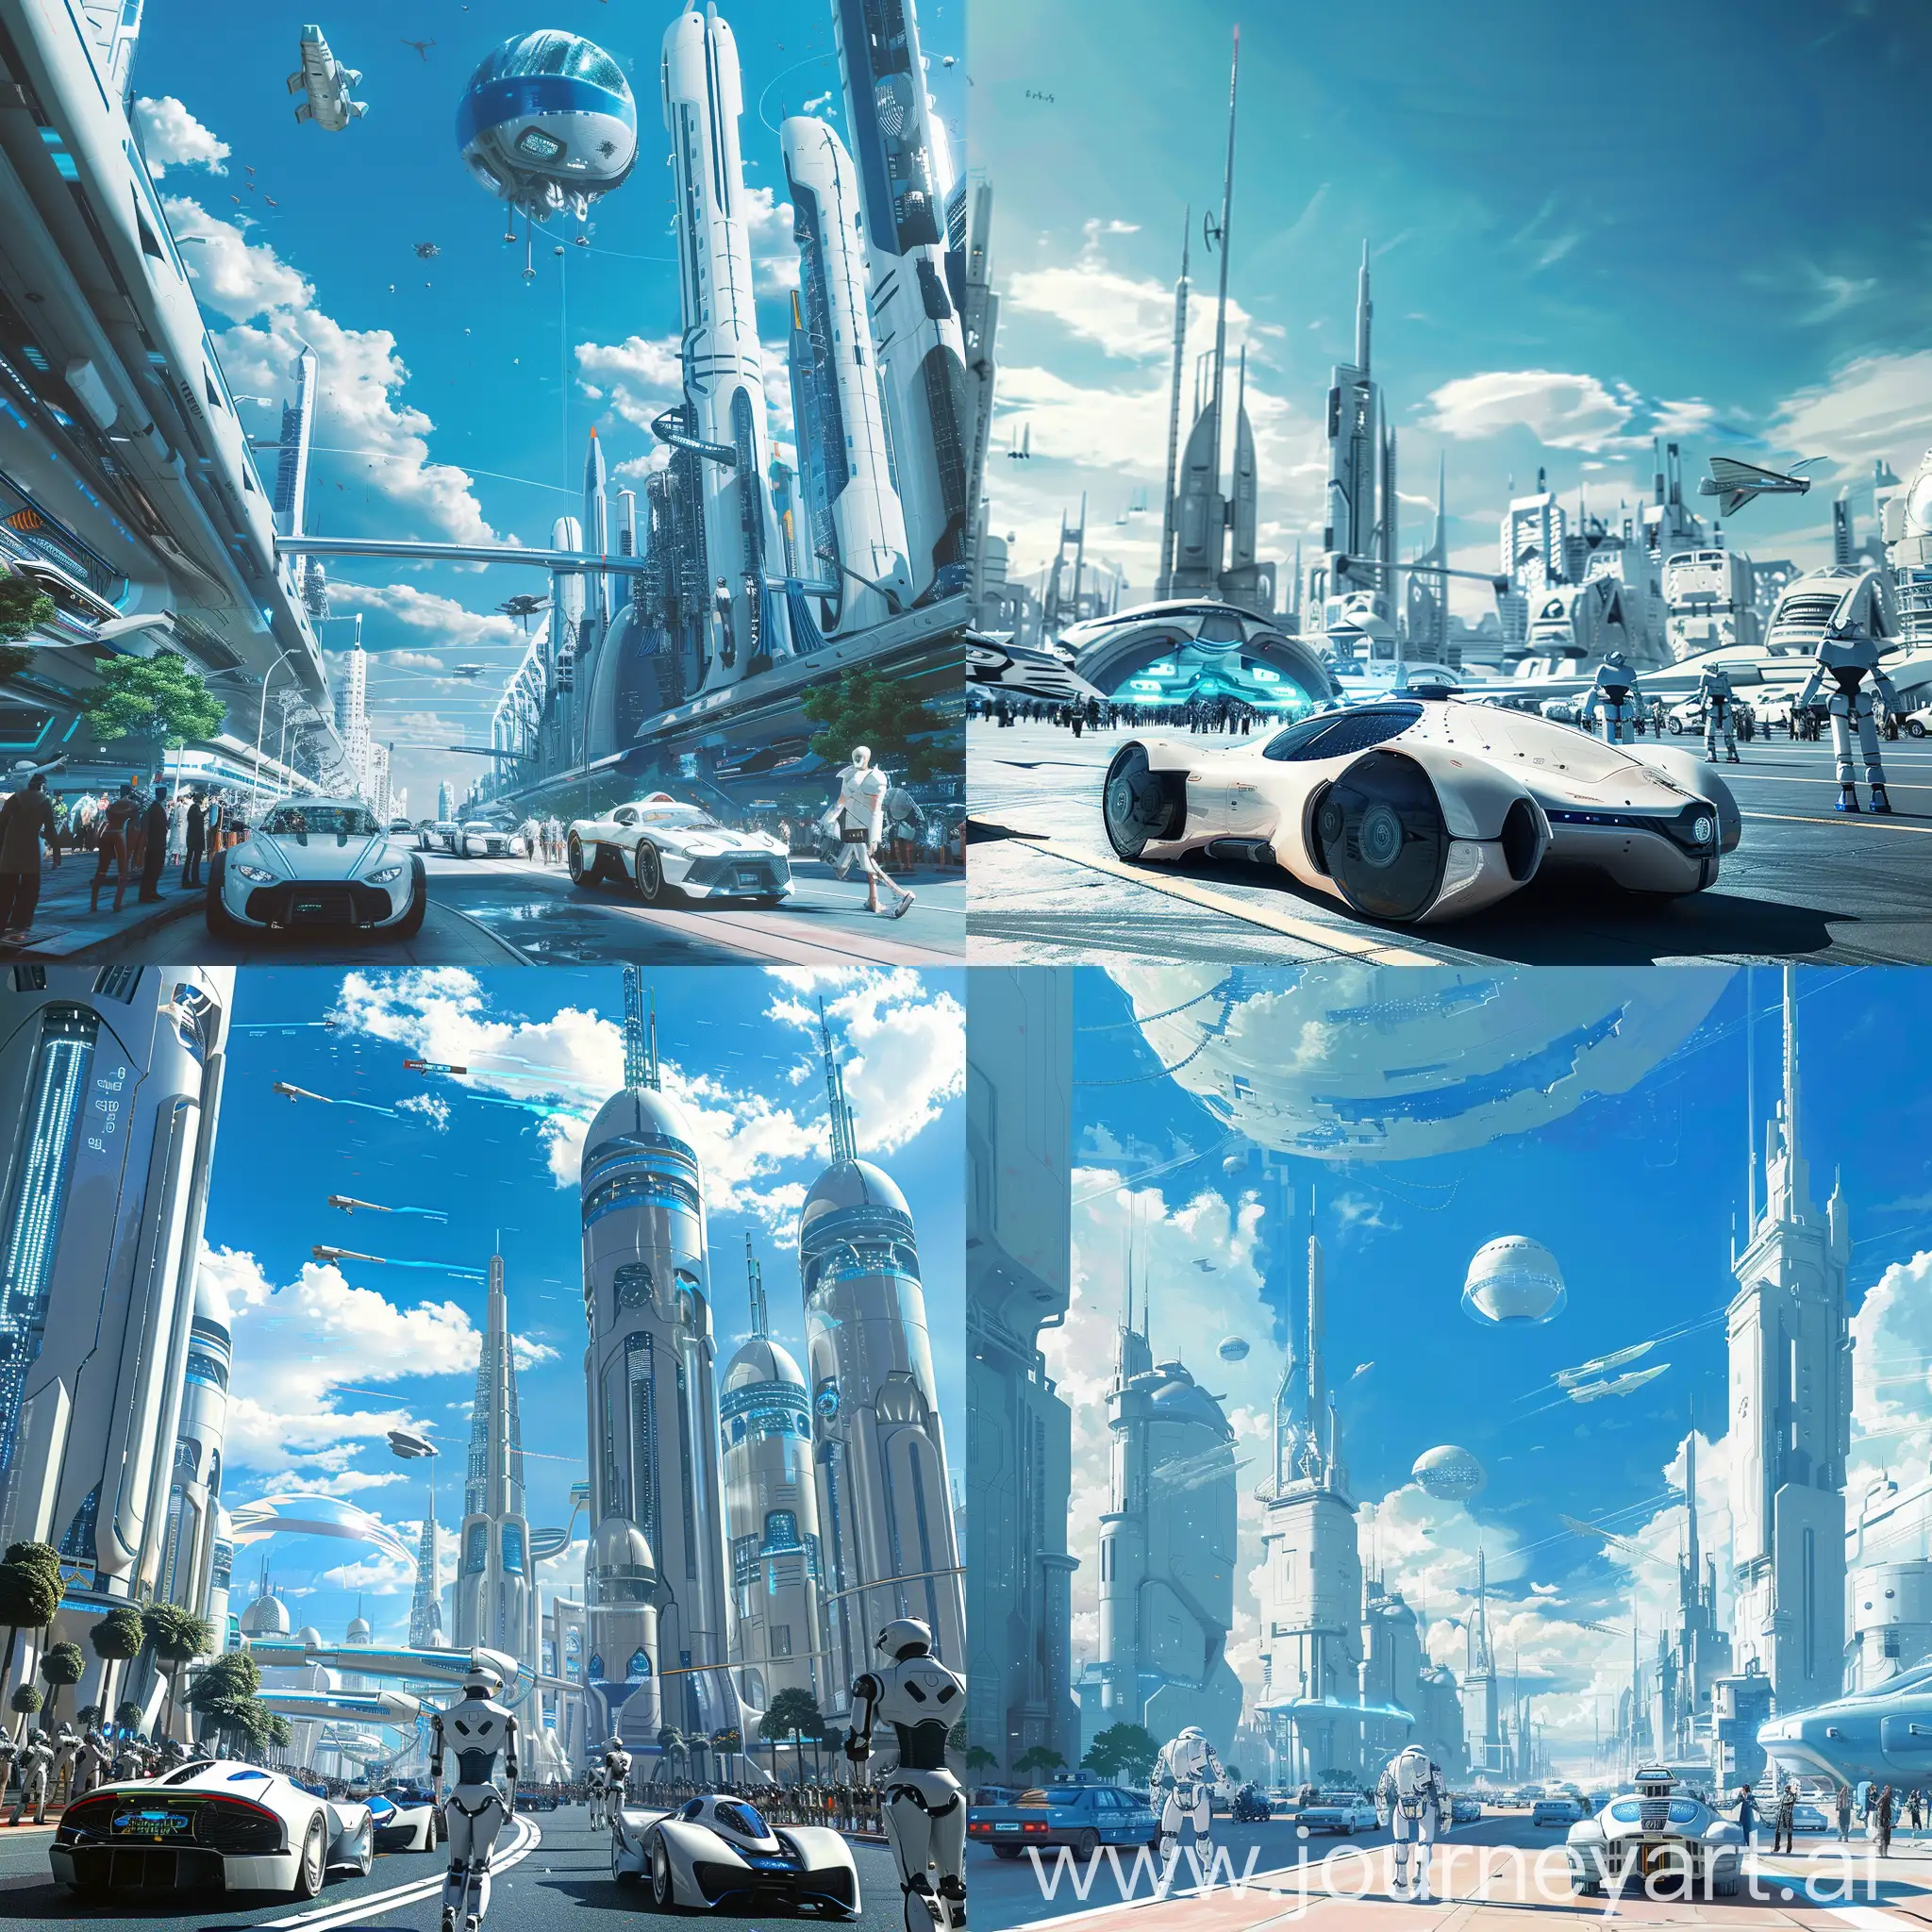 Futuristic-SciFi-Cityscape-with-Robots-Concept-Cars-and-People